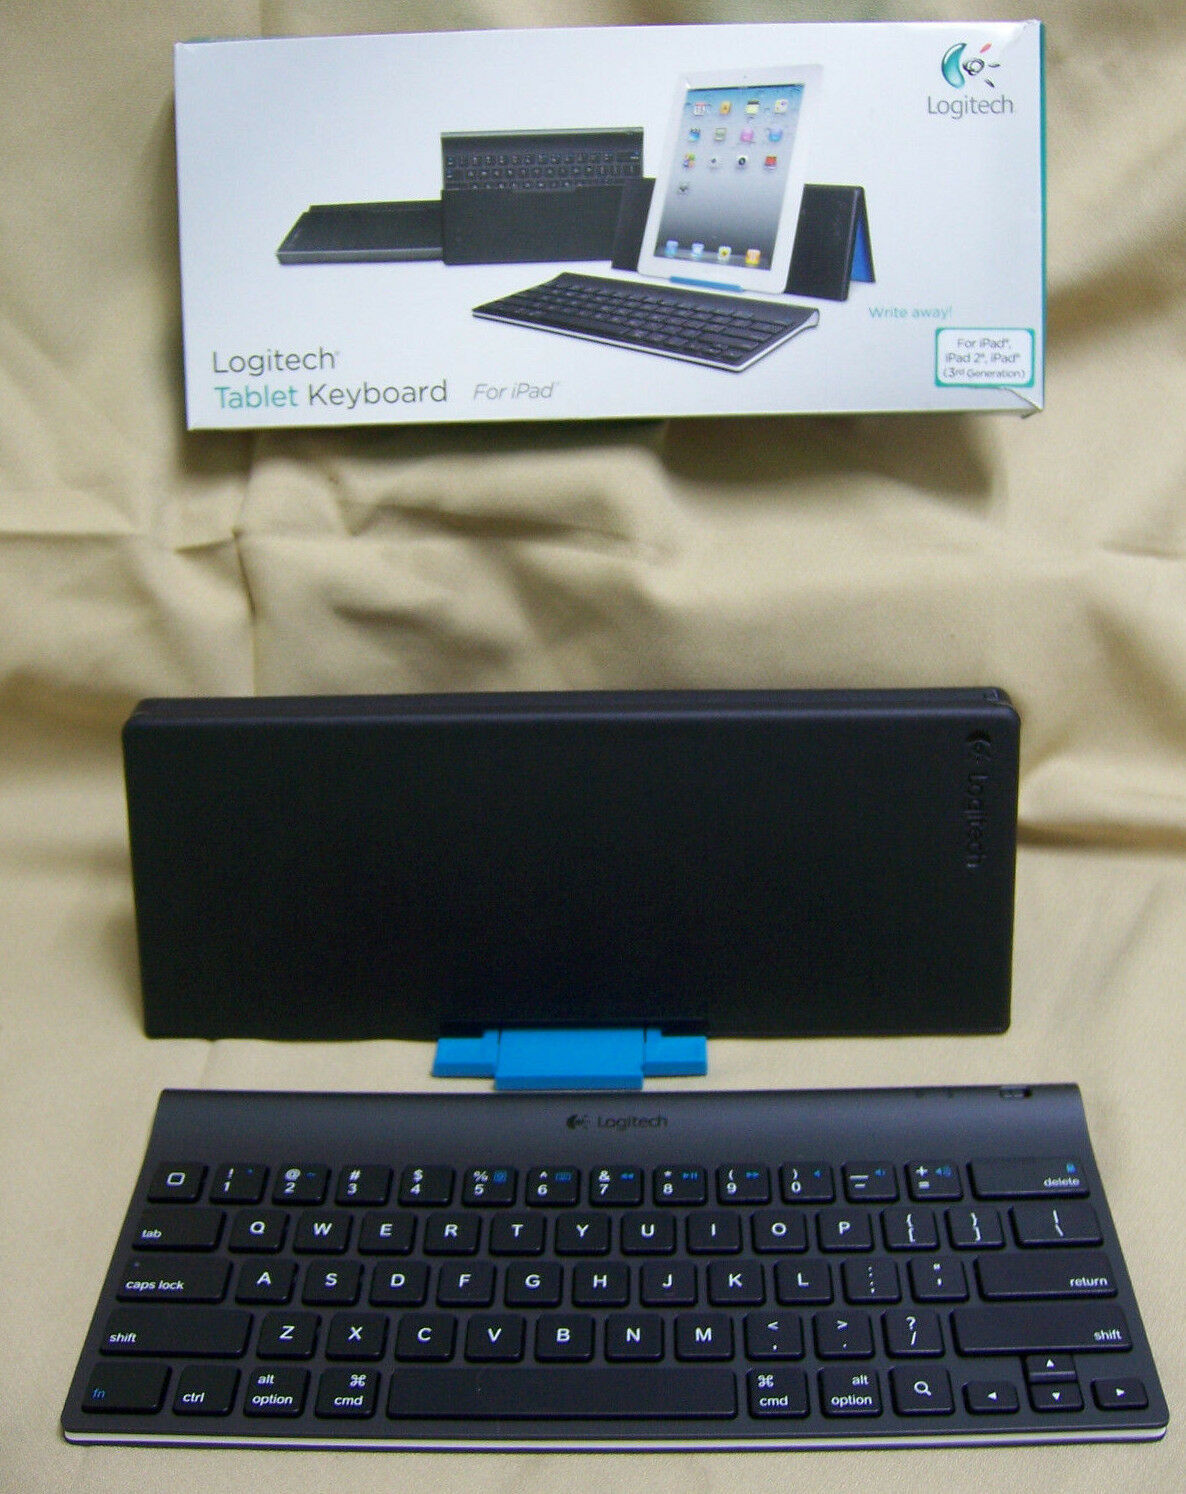 Logitech KEYBOARD Y-R0021 FOR iPad iOS Android Tablet Bluetooth Great Condition - $19.79